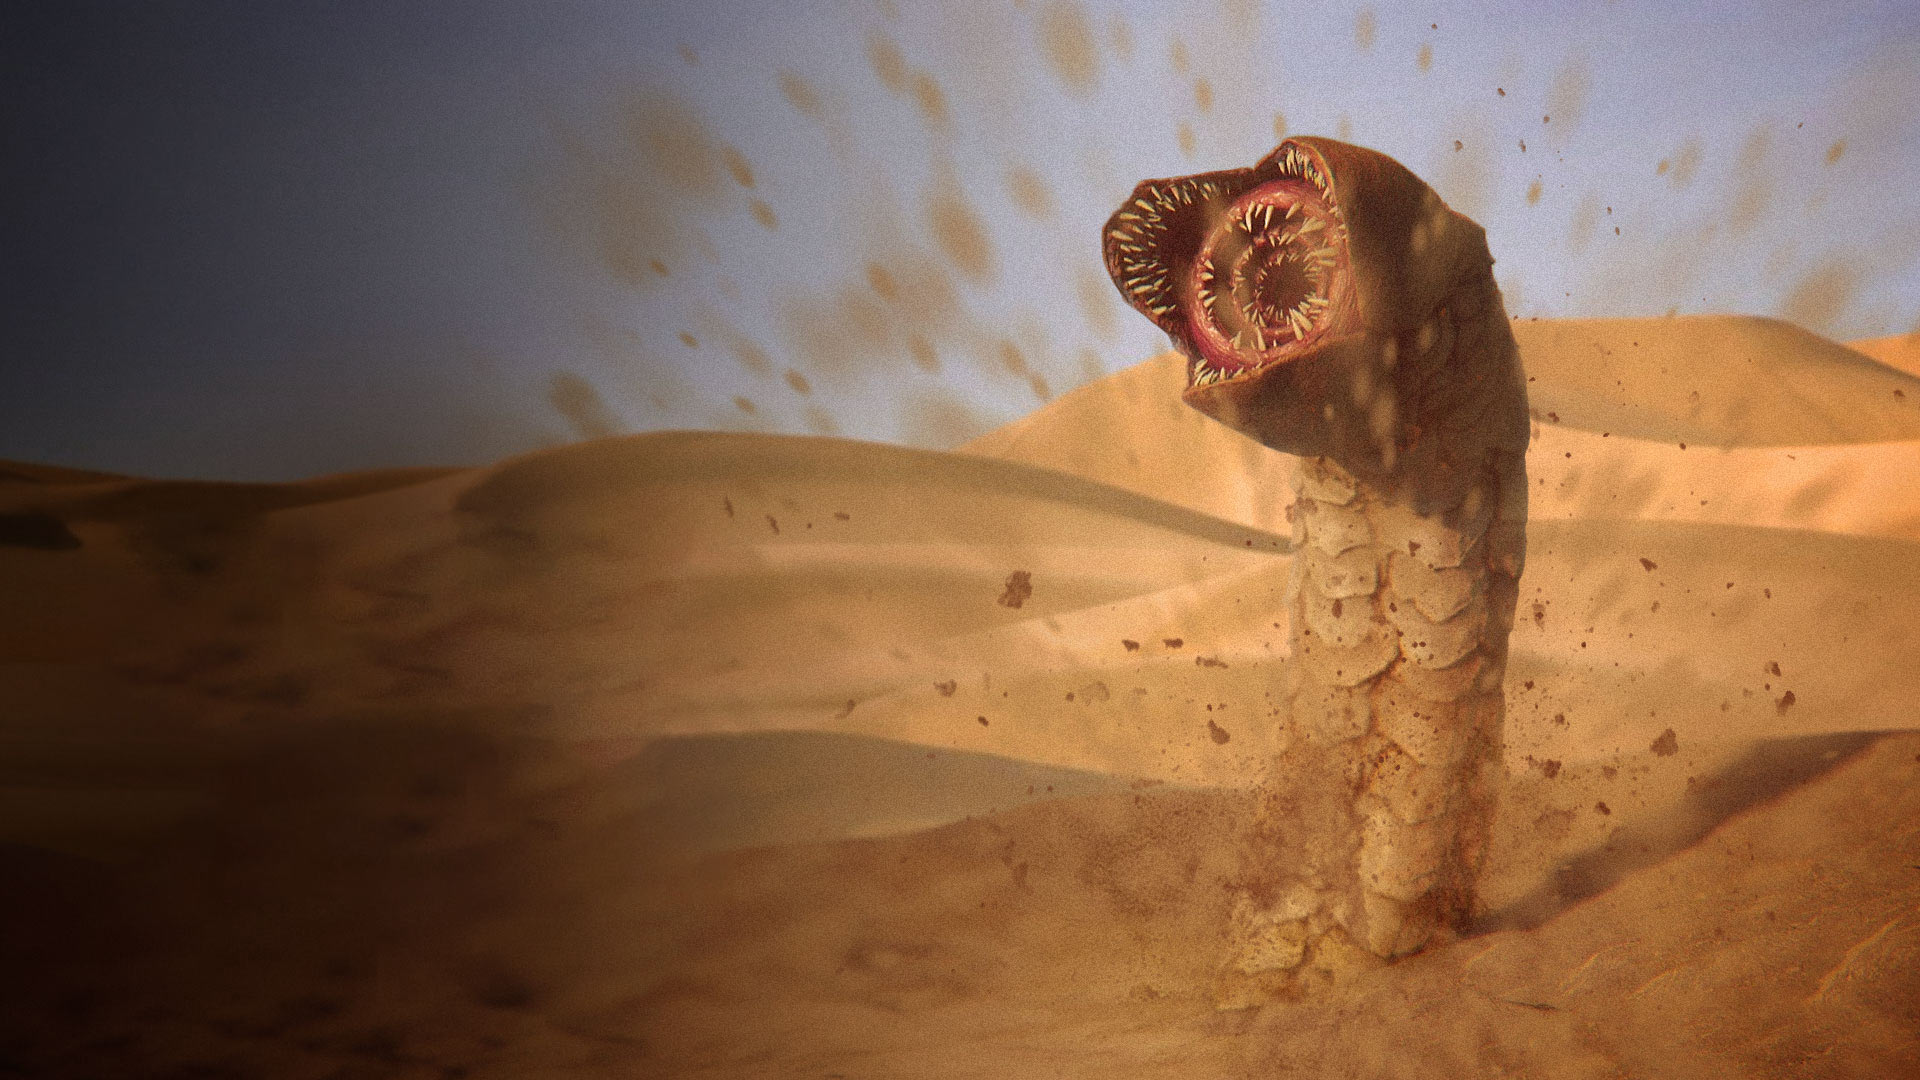 What If Sandworms Were the Size of Humans?